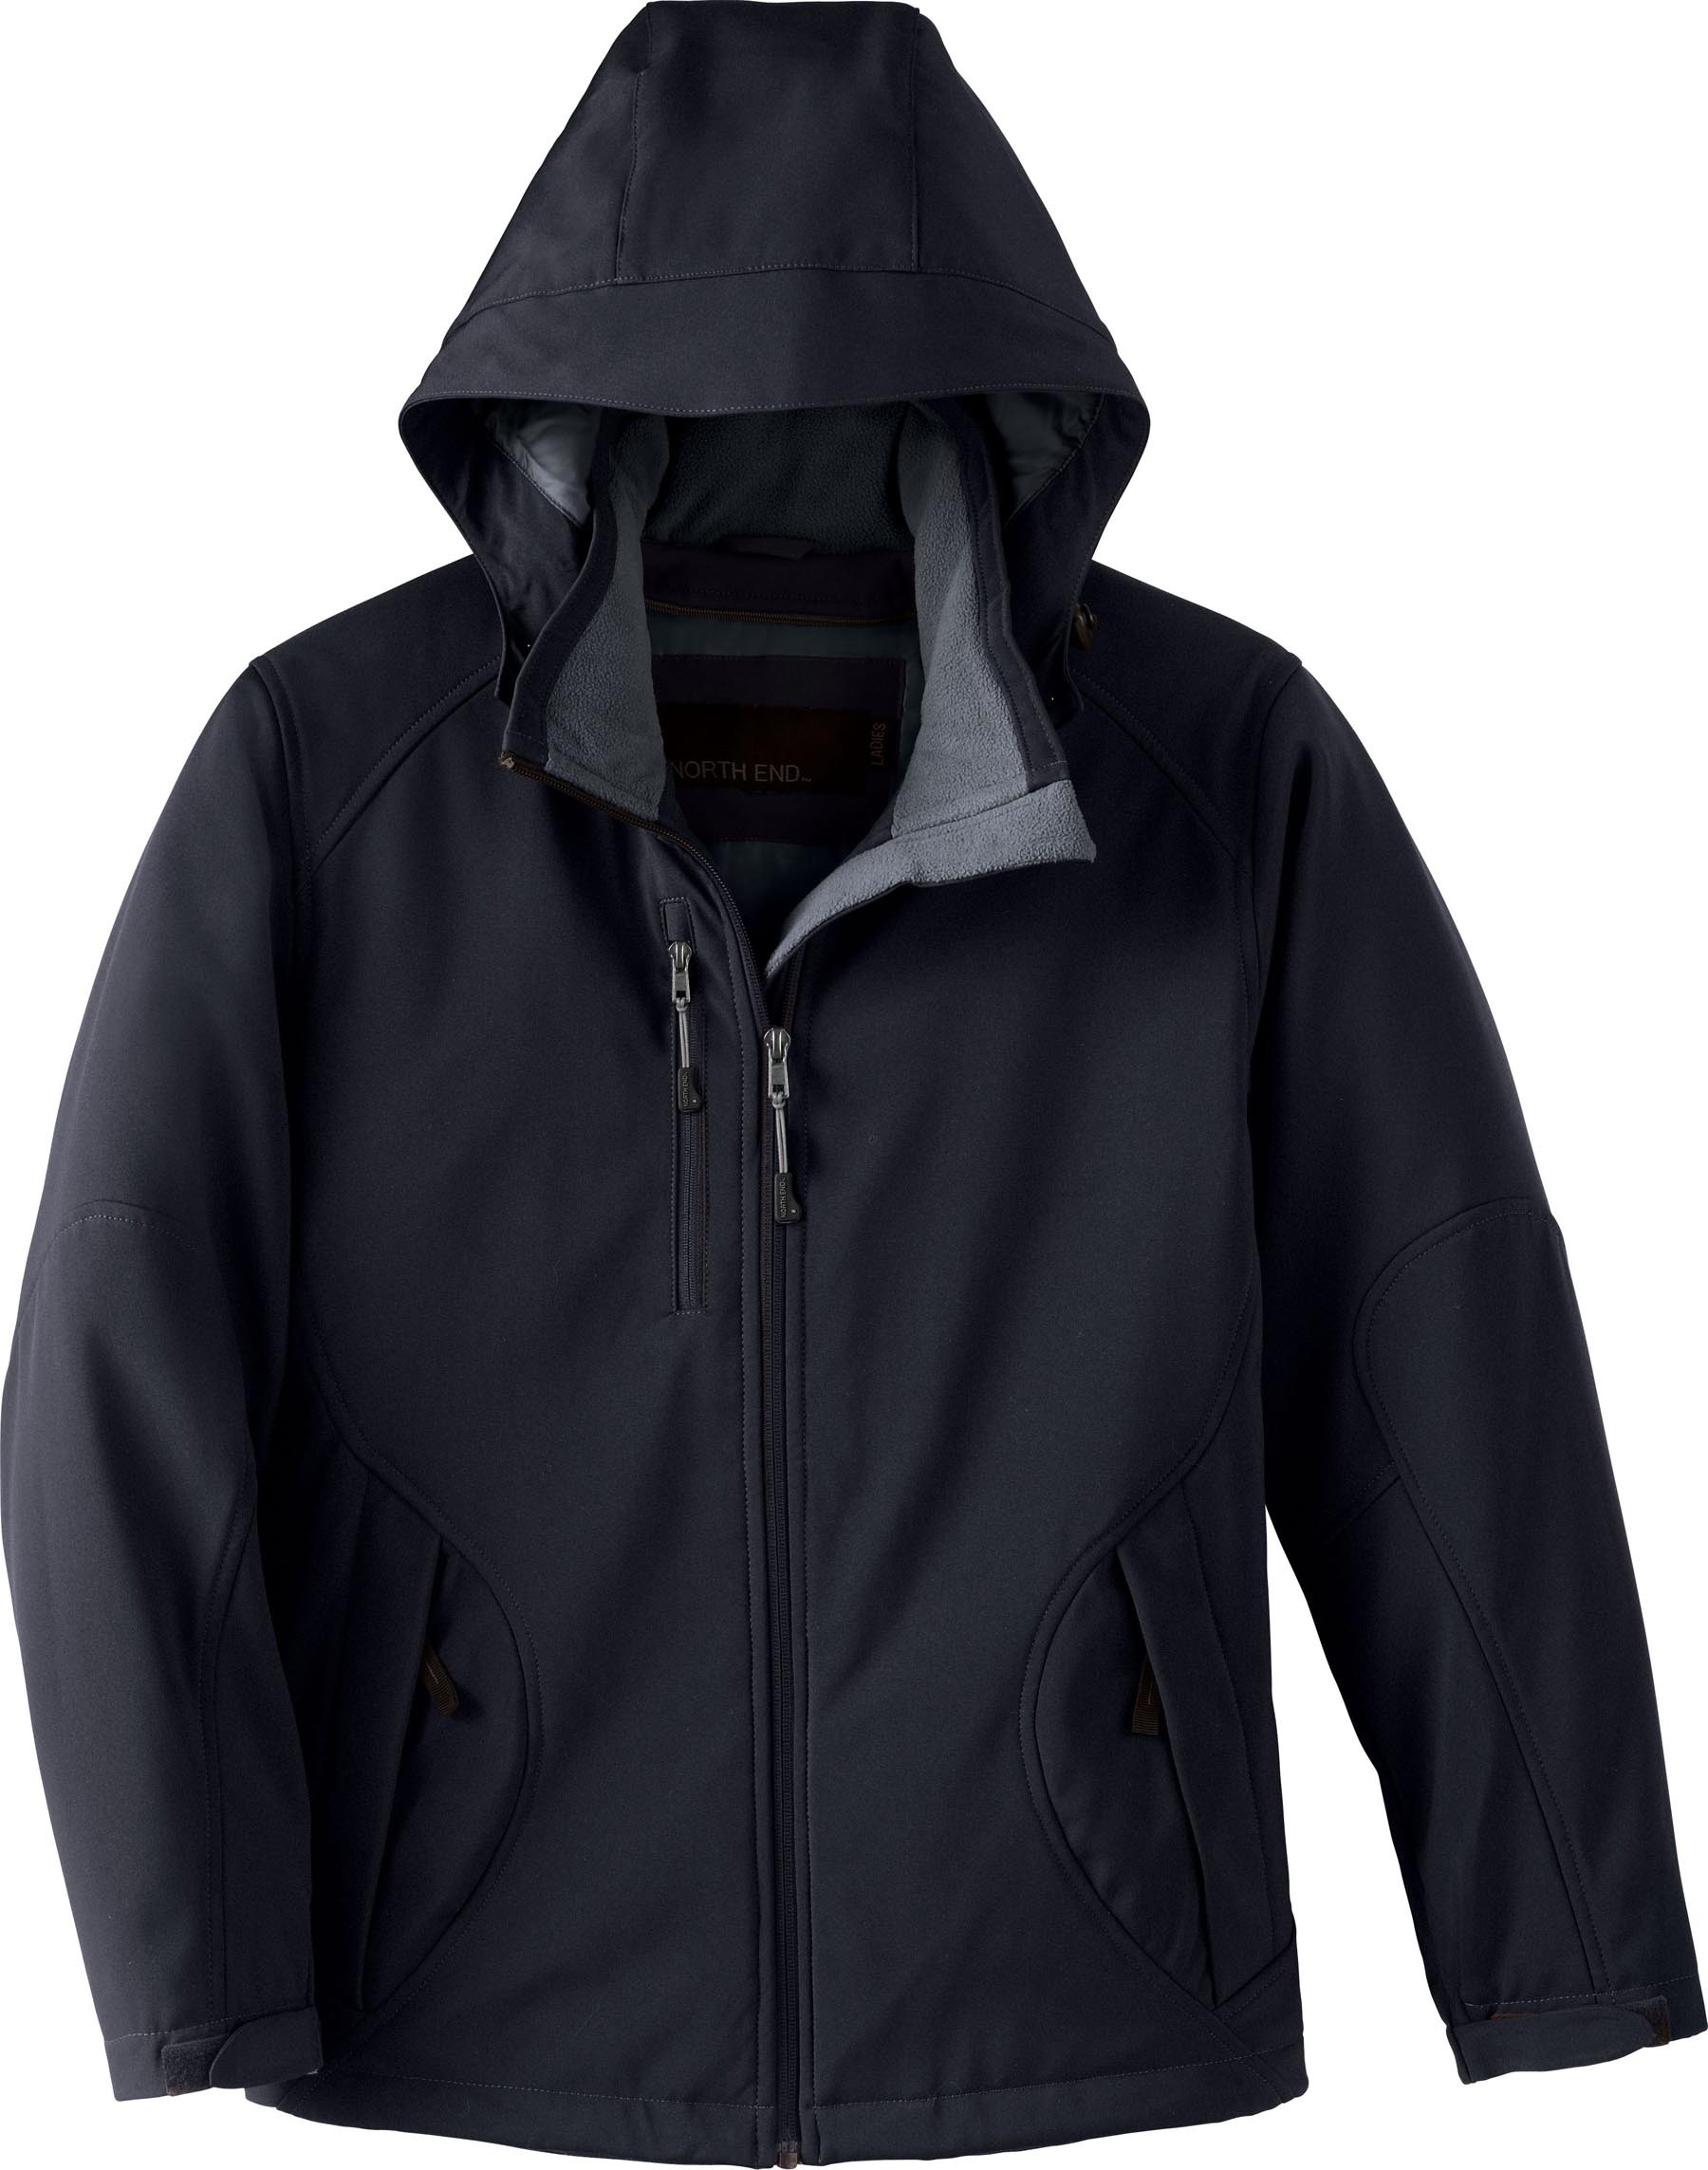 North End 78080 - Ladies' Glacier Insulated Three-Layer Fleece Bonded Soft Shell Jacket with Detachable Hood